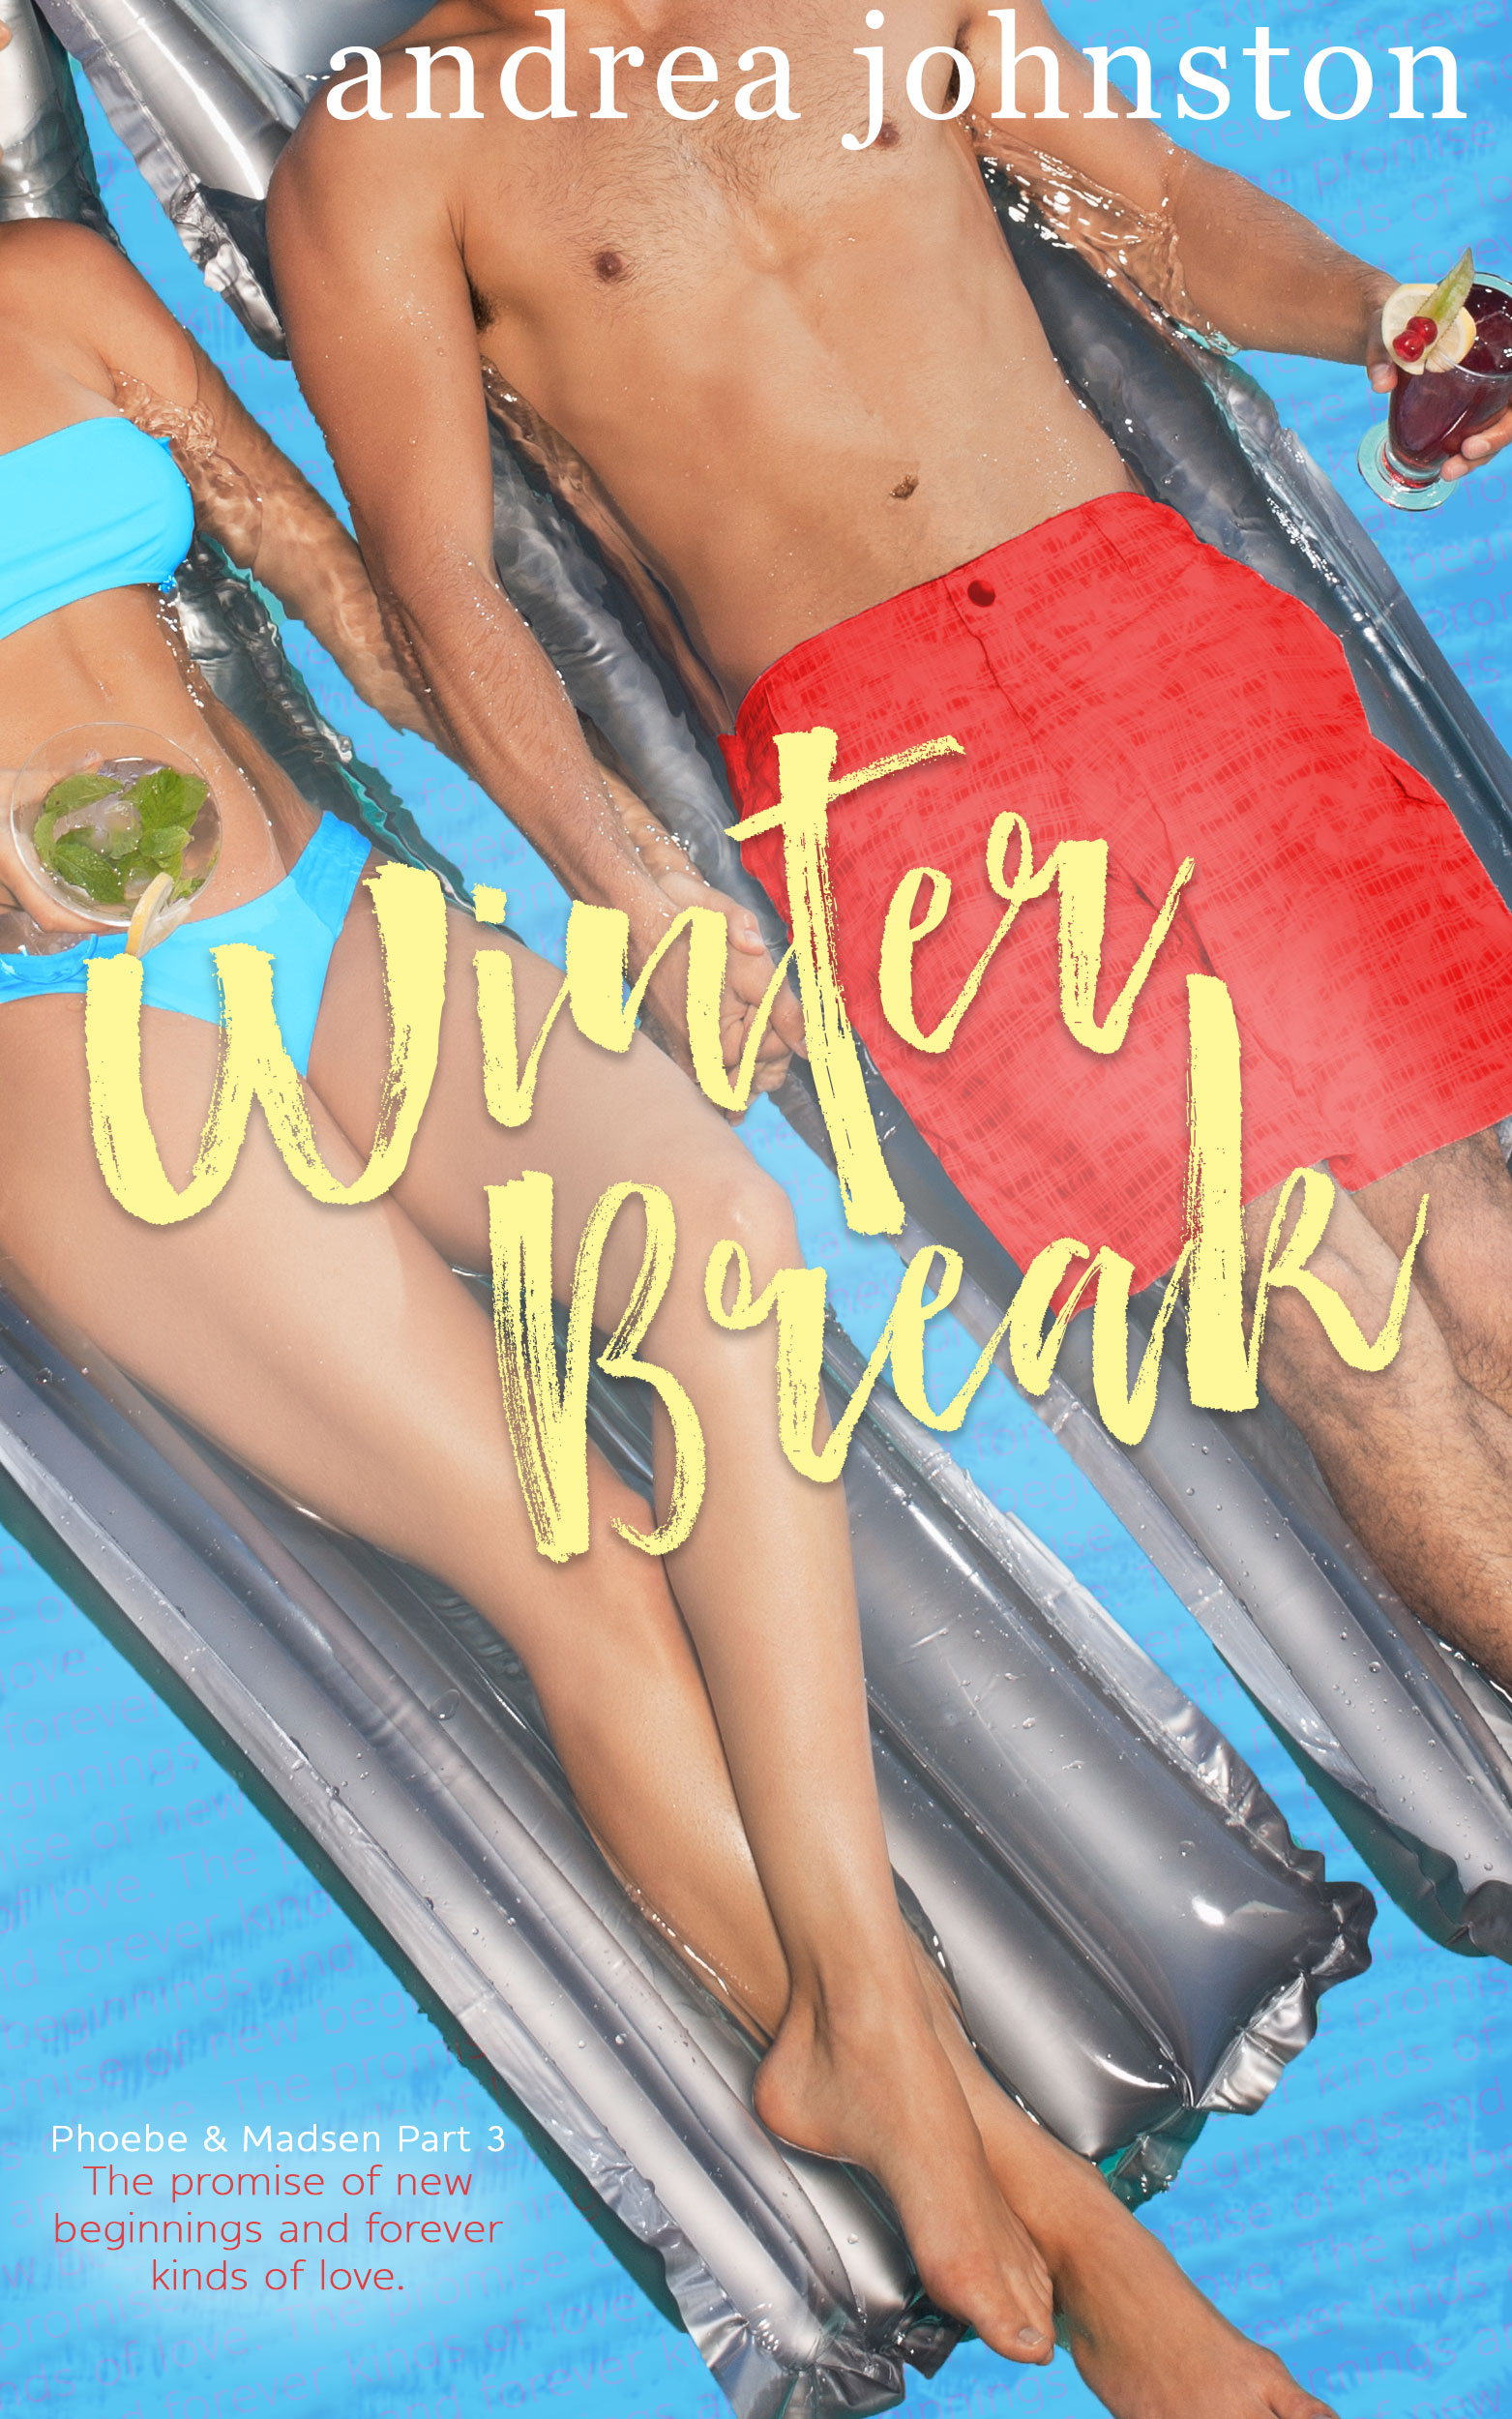  Winter Break was a coming of age novella series that deals with real life issues and circumstances, I wish we could have had a little more from this series.